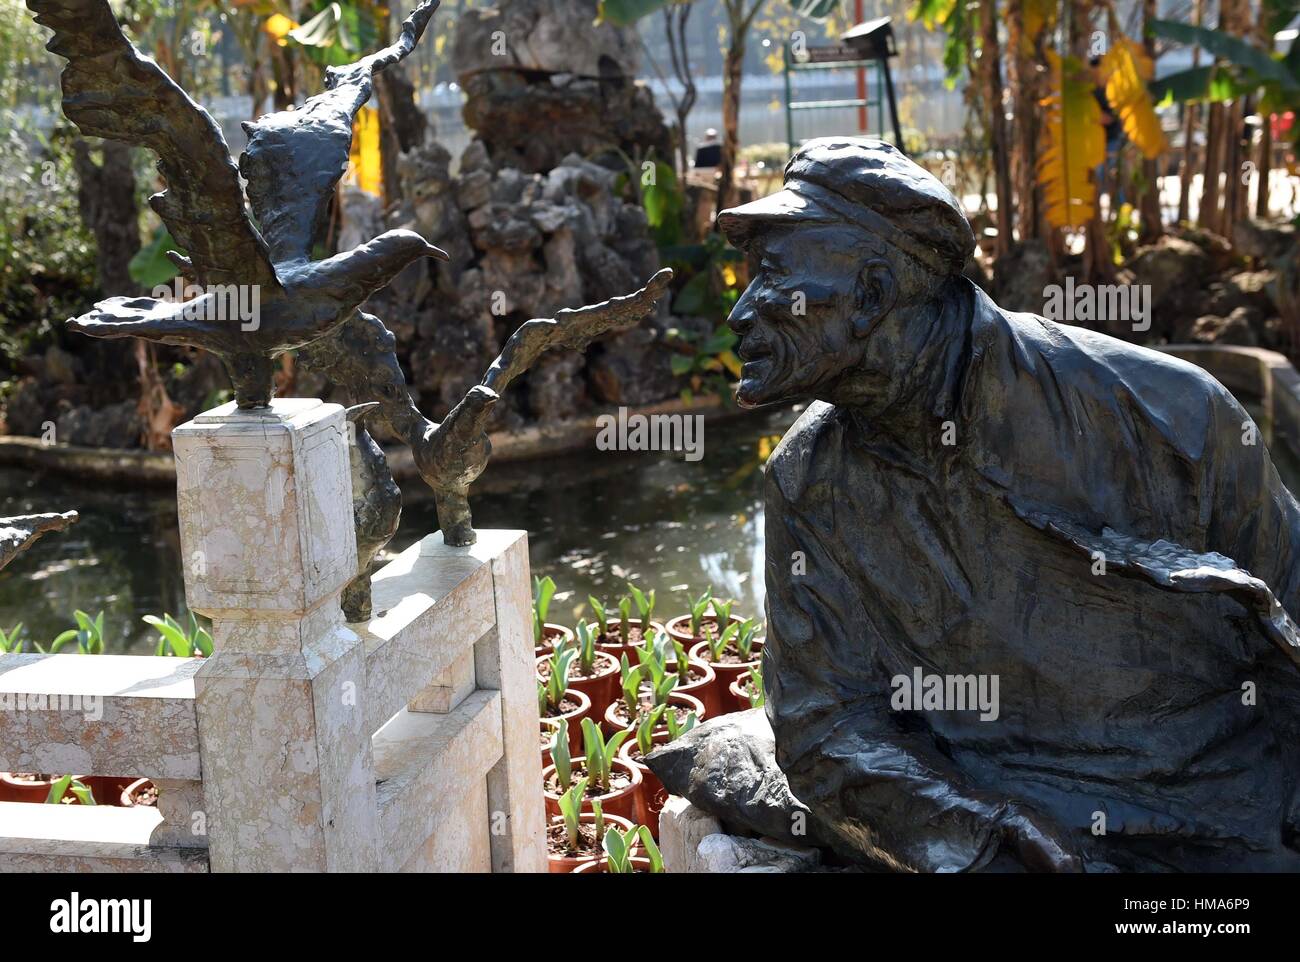 Kunming. 26th Jan, 2017. Photo taken on Jan. 26, 2017 shows sculptures of gulls and a man at Cuihu Park in Kunming, capital of southwest China's Yunnan Province. Tens of thousands of black-headed gulls fly to Kunming from northern China every winter in the past 32 years. Credit: Lin Yiguang/Xinhua/Alamy Live News Stock Photo